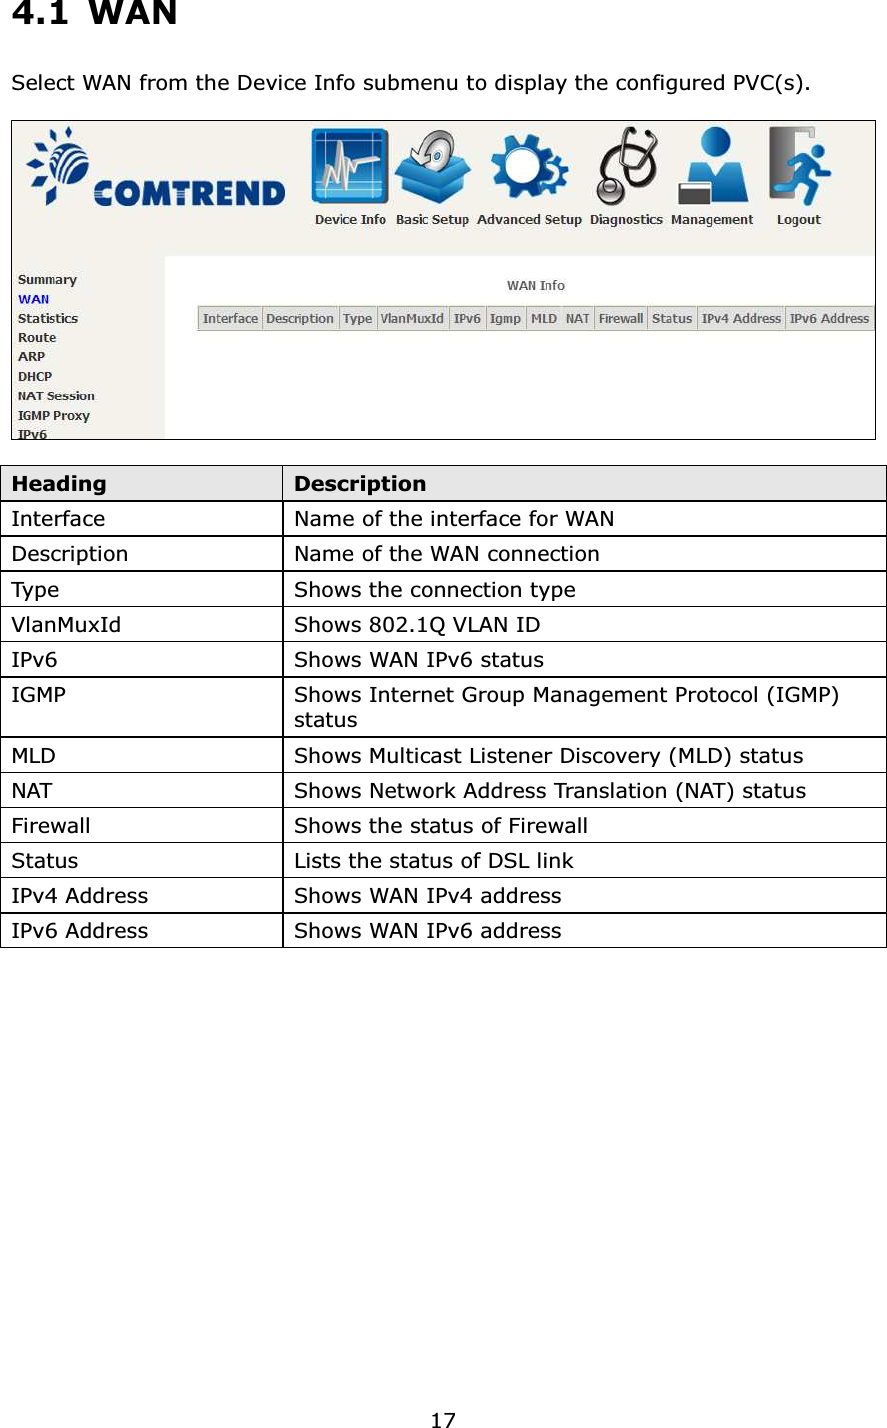  174.1 WAN Select WAN from the Device Info submenu to display the configured PVC(s).    Heading  Description Interface   Name of the interface for WAN Description  Name of the WAN connection Type  Shows the connection type   VlanMuxId  Shows 802.1Q VLAN ID IPv6  Shows WAN IPv6 status IGMP  Shows Internet Group Management Protocol (IGMP) status MLD  Shows Multicast Listener Discovery (MLD) status NAT  Shows Network Address Translation (NAT) status Firewall  Shows the status of Firewall Status  Lists the status of DSL link IPv4 Address  Shows WAN IPv4 address IPv6 Address  Shows WAN IPv6 address   